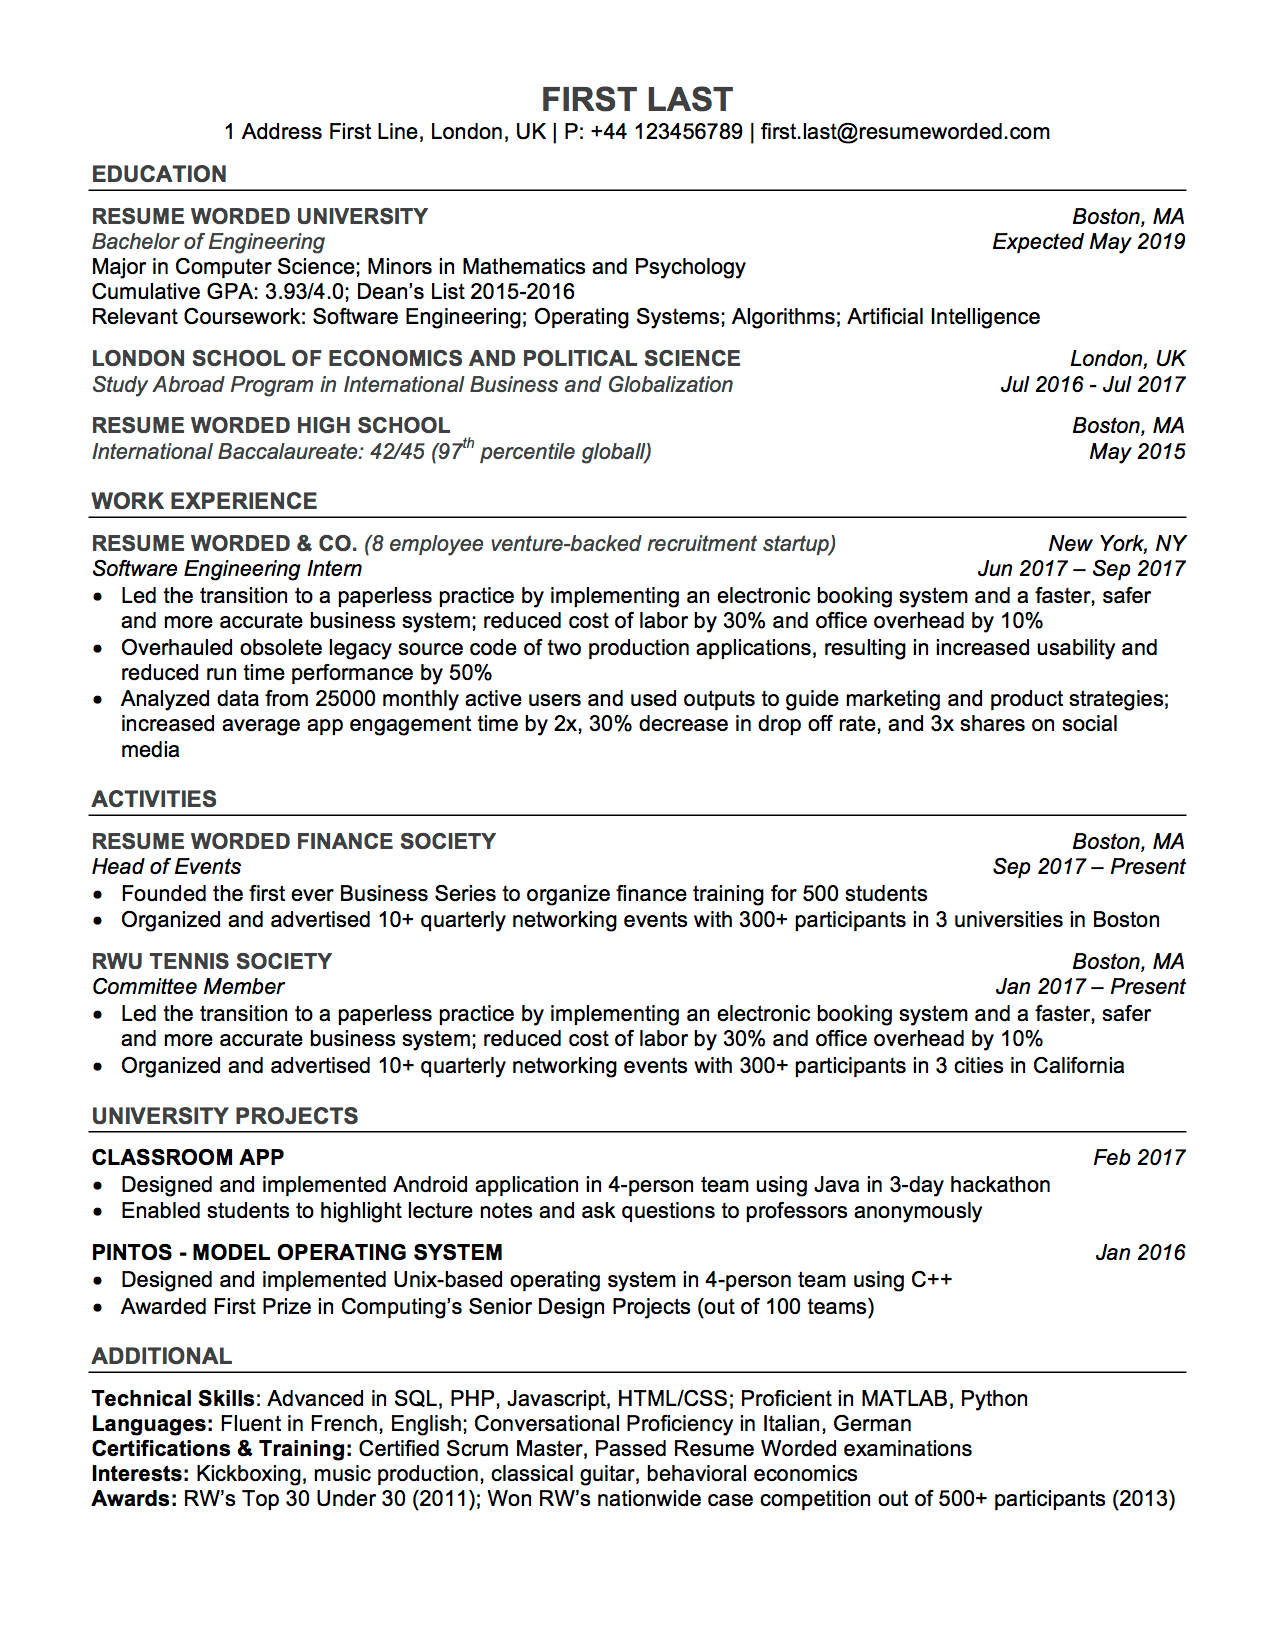 Free Downloadable Resume Templates Student Template V3 free downloadable resume templates|wikiresume.com